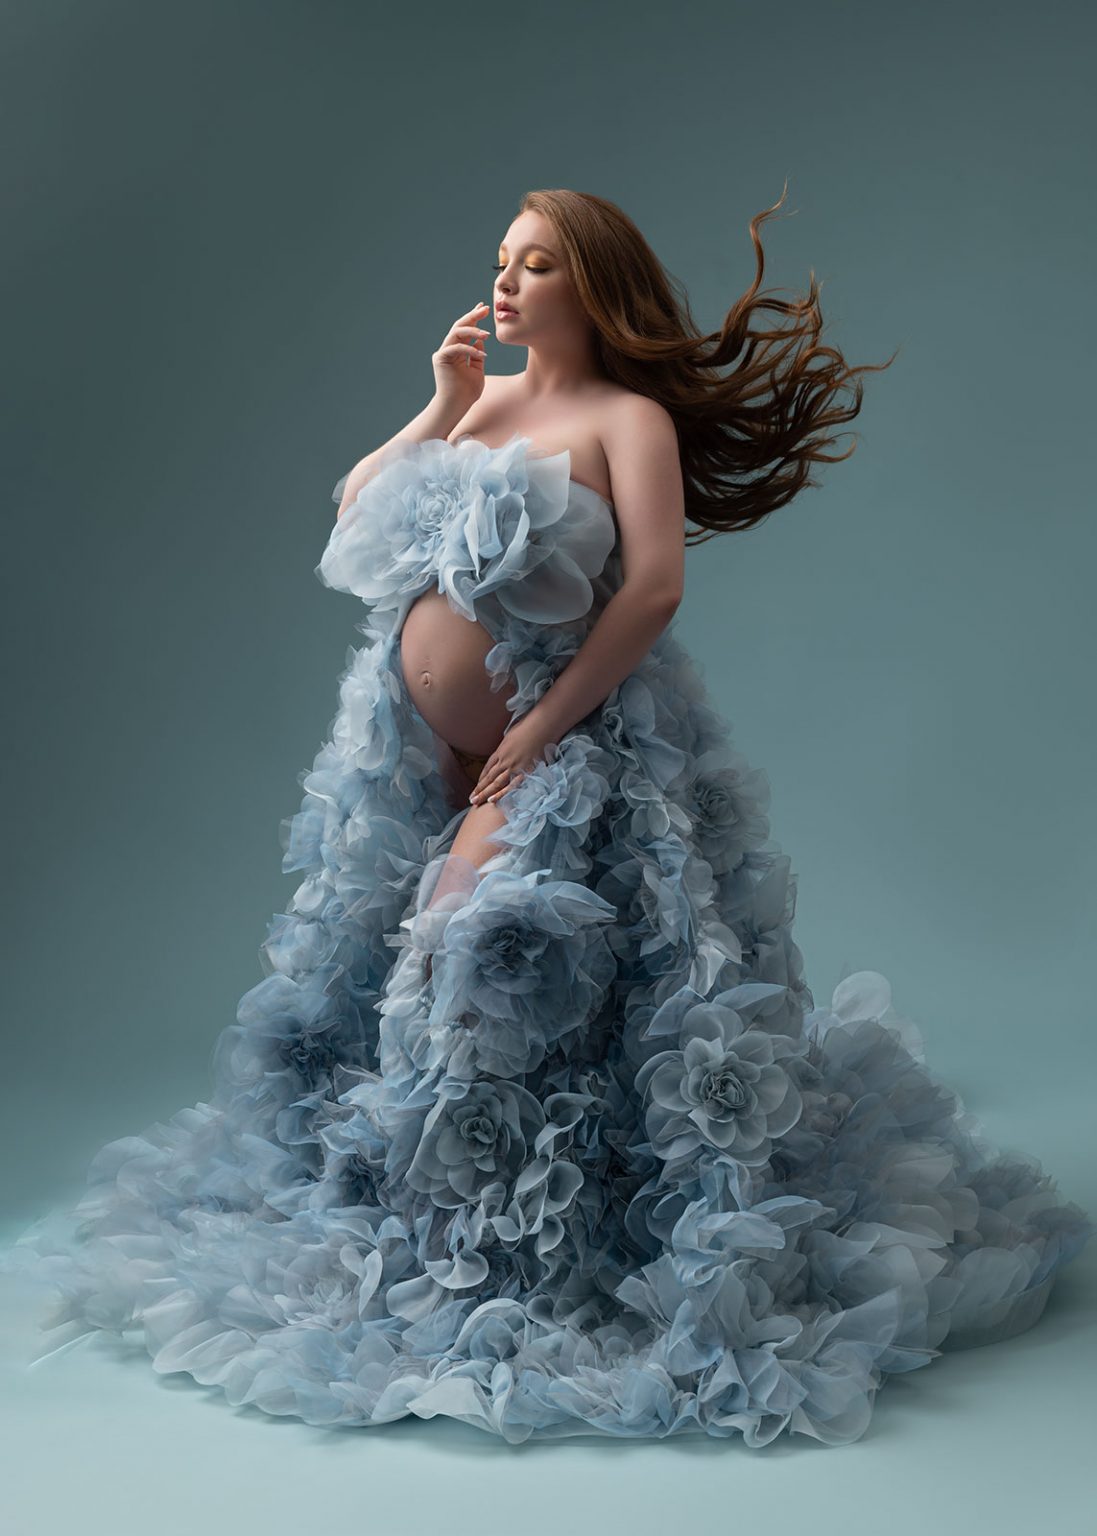 Luxury maternity photoshoot with blue floral ruffle dress